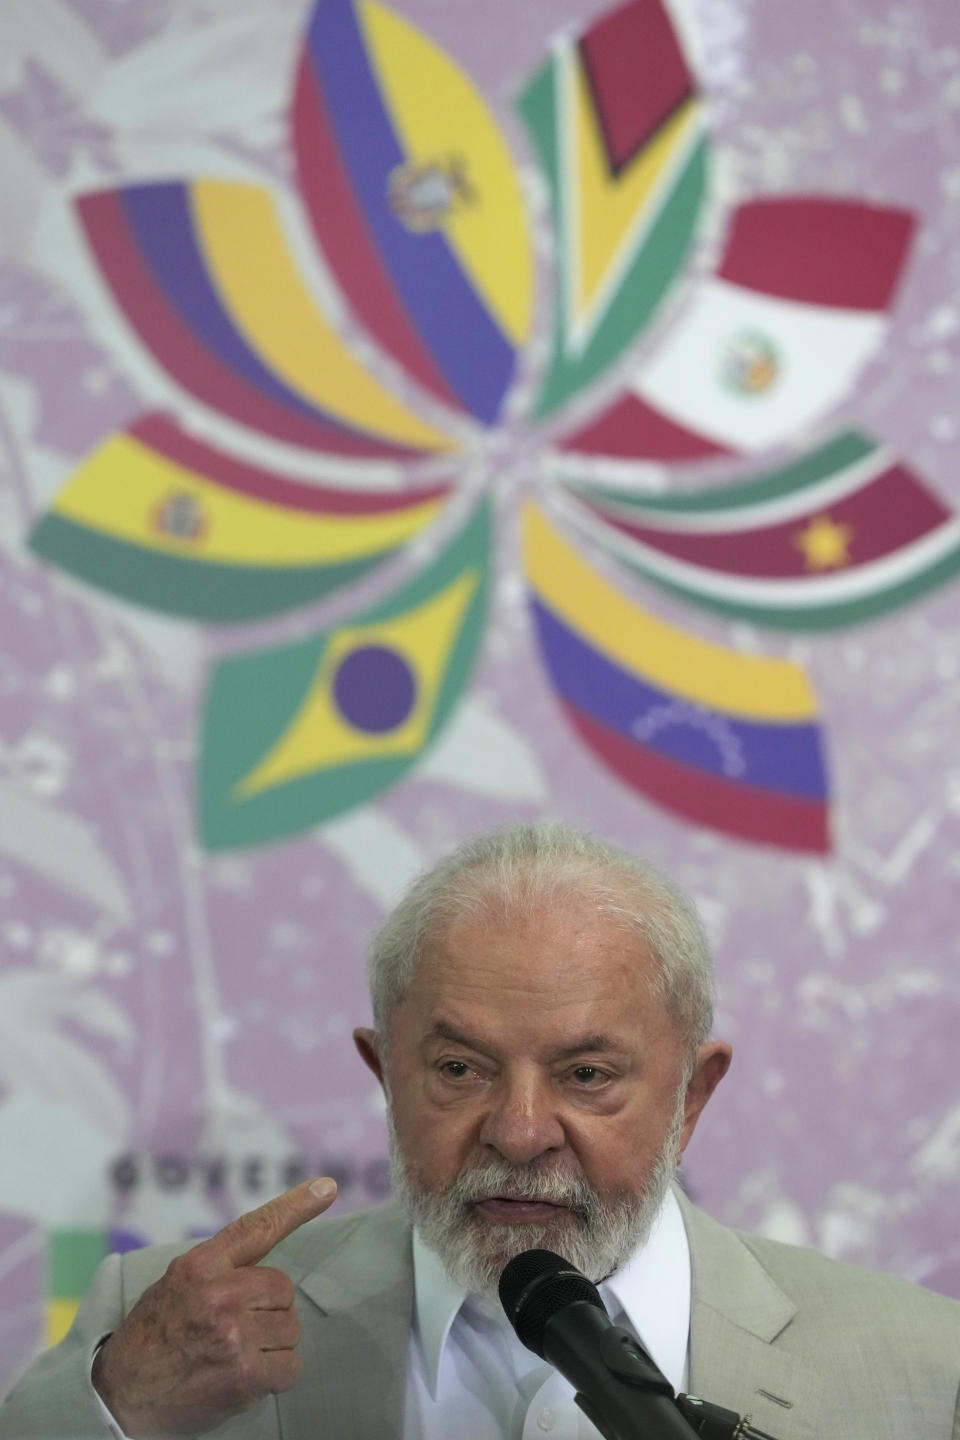 Brazil's President Luiz Inacio Lula Da Silva gives a statement to the media at the end of the Amazon Summit, at the Hangar Convention Center in Belem, Brazil, Wednesday, Aug. 9, 2023. Belem hosted the Amazon Cooperation Treaty Organization that met to chart a common course for protection of the bioregion, and to address organized crime. (AP Photo/Eraldo Peres)